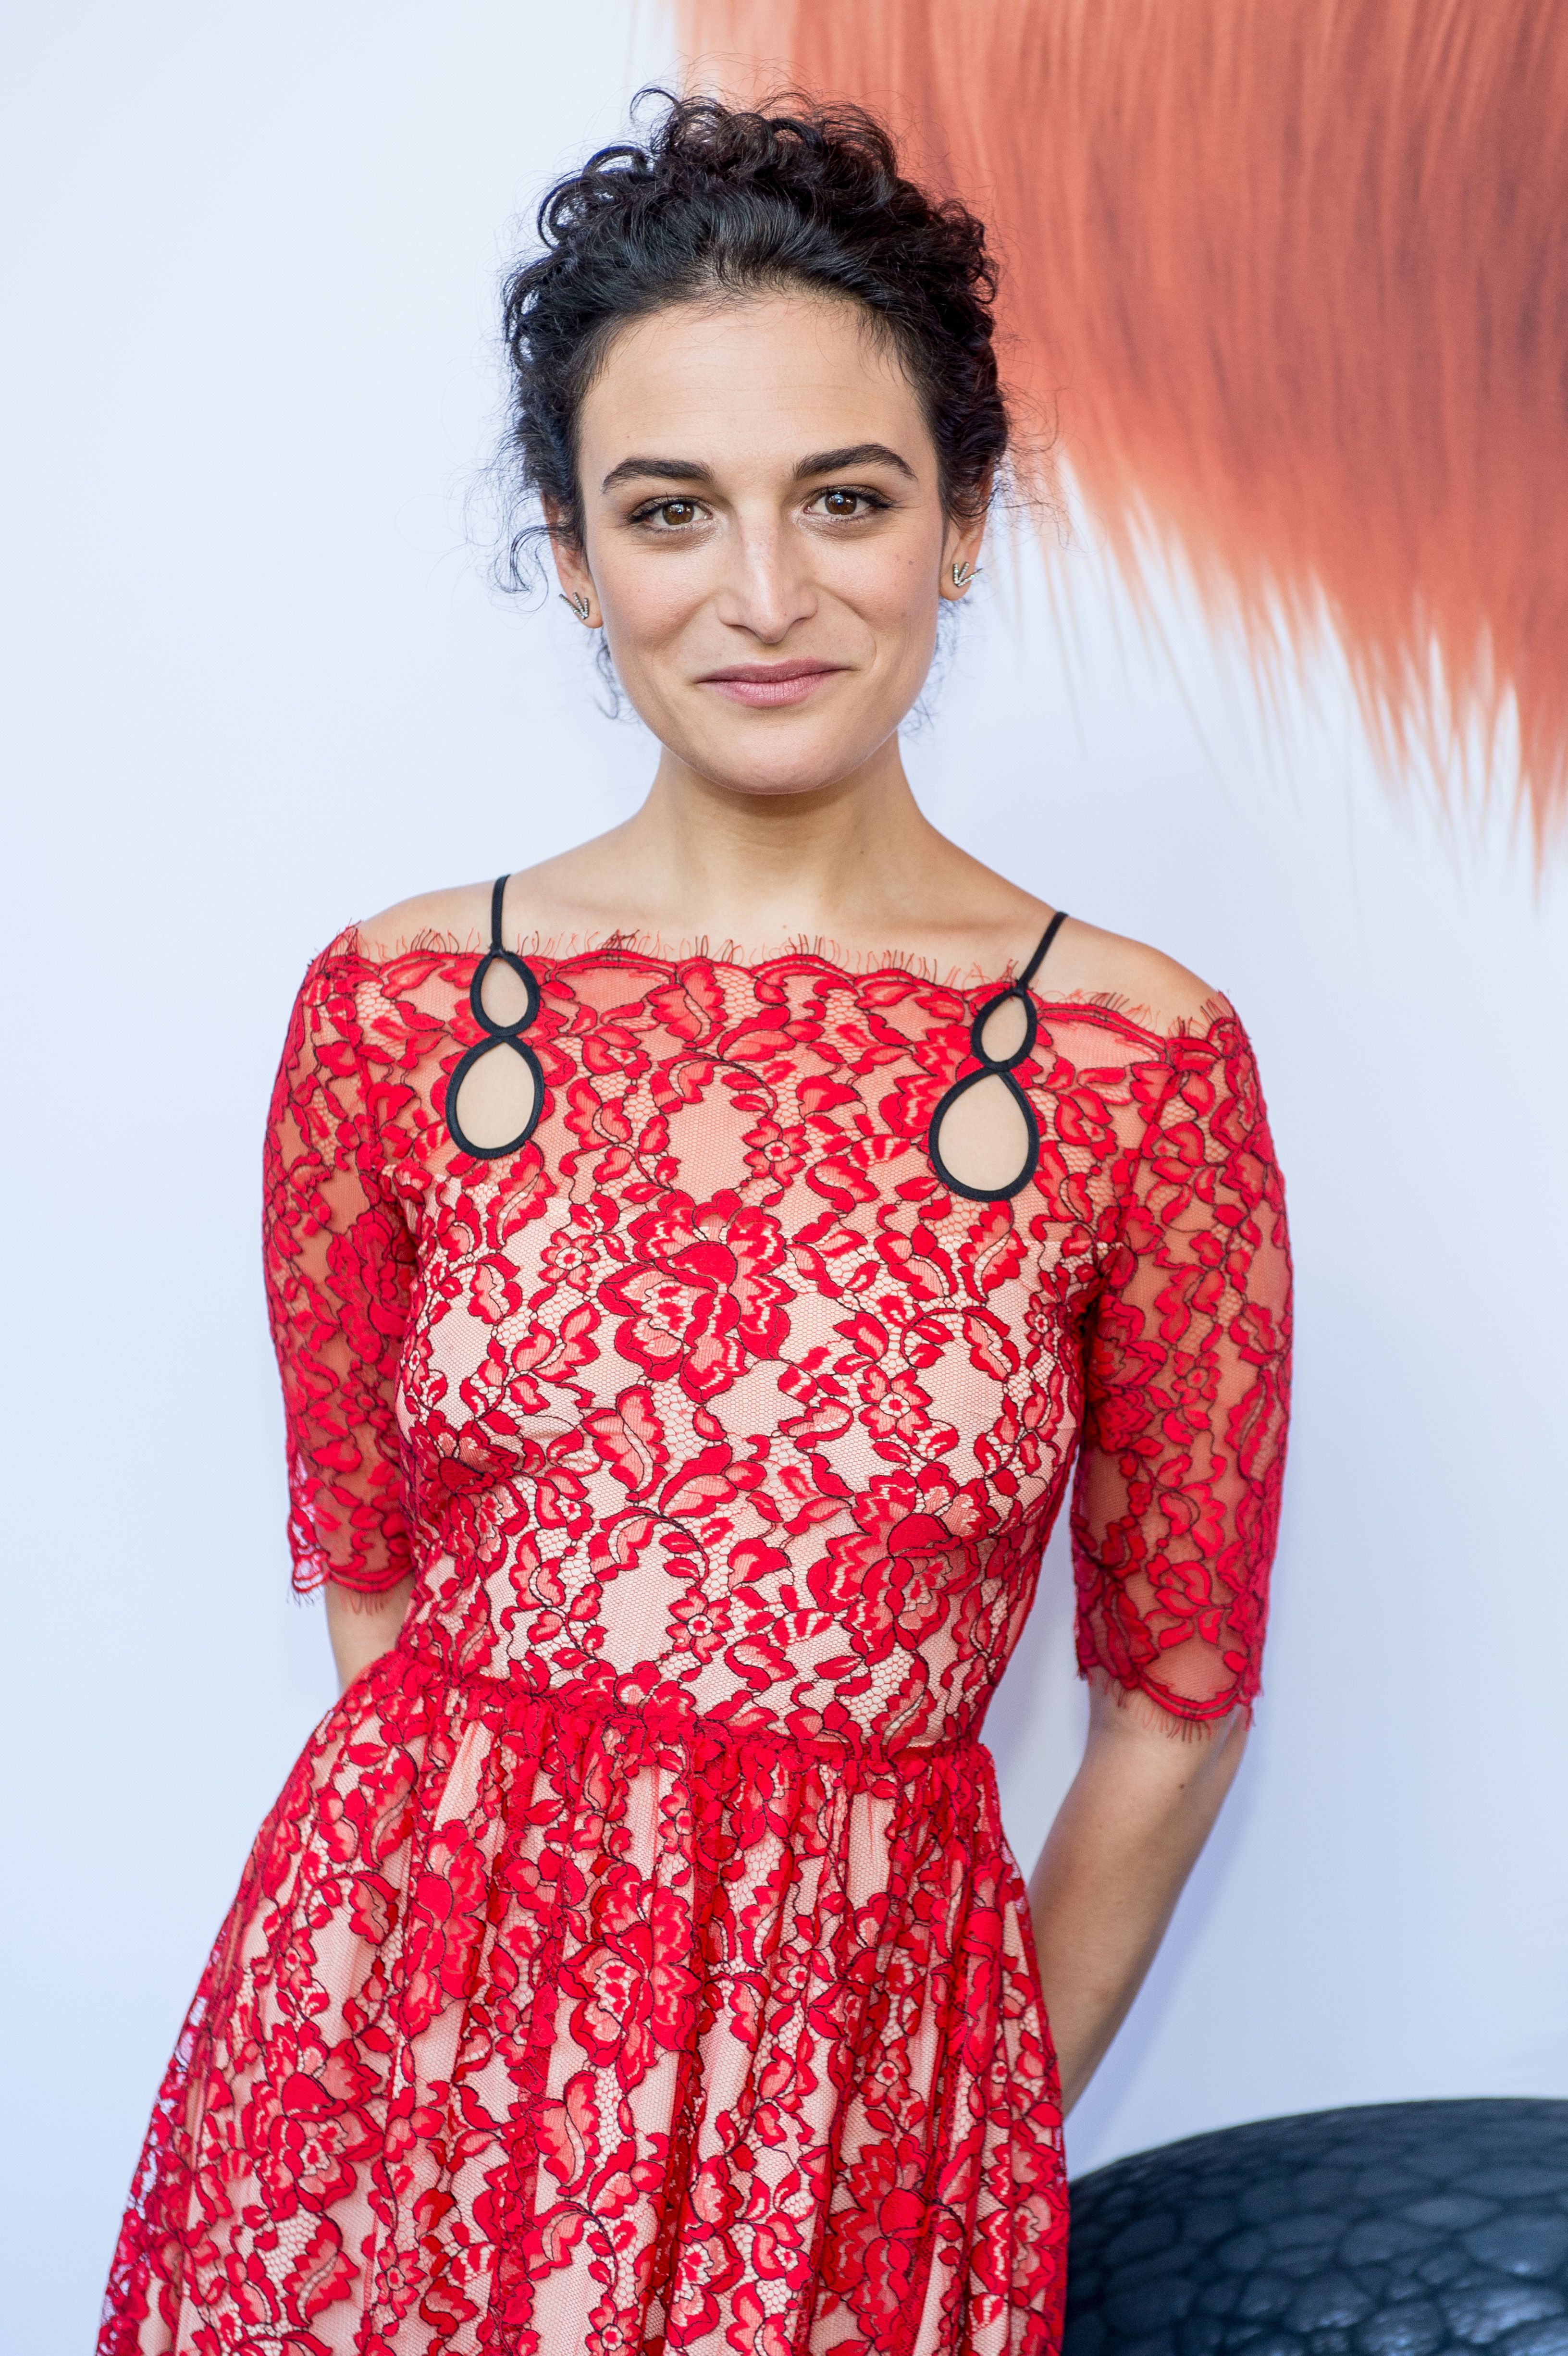 Red Floral Dress worn by Emma (Jenny Slate) as seen in I Want You Back movie